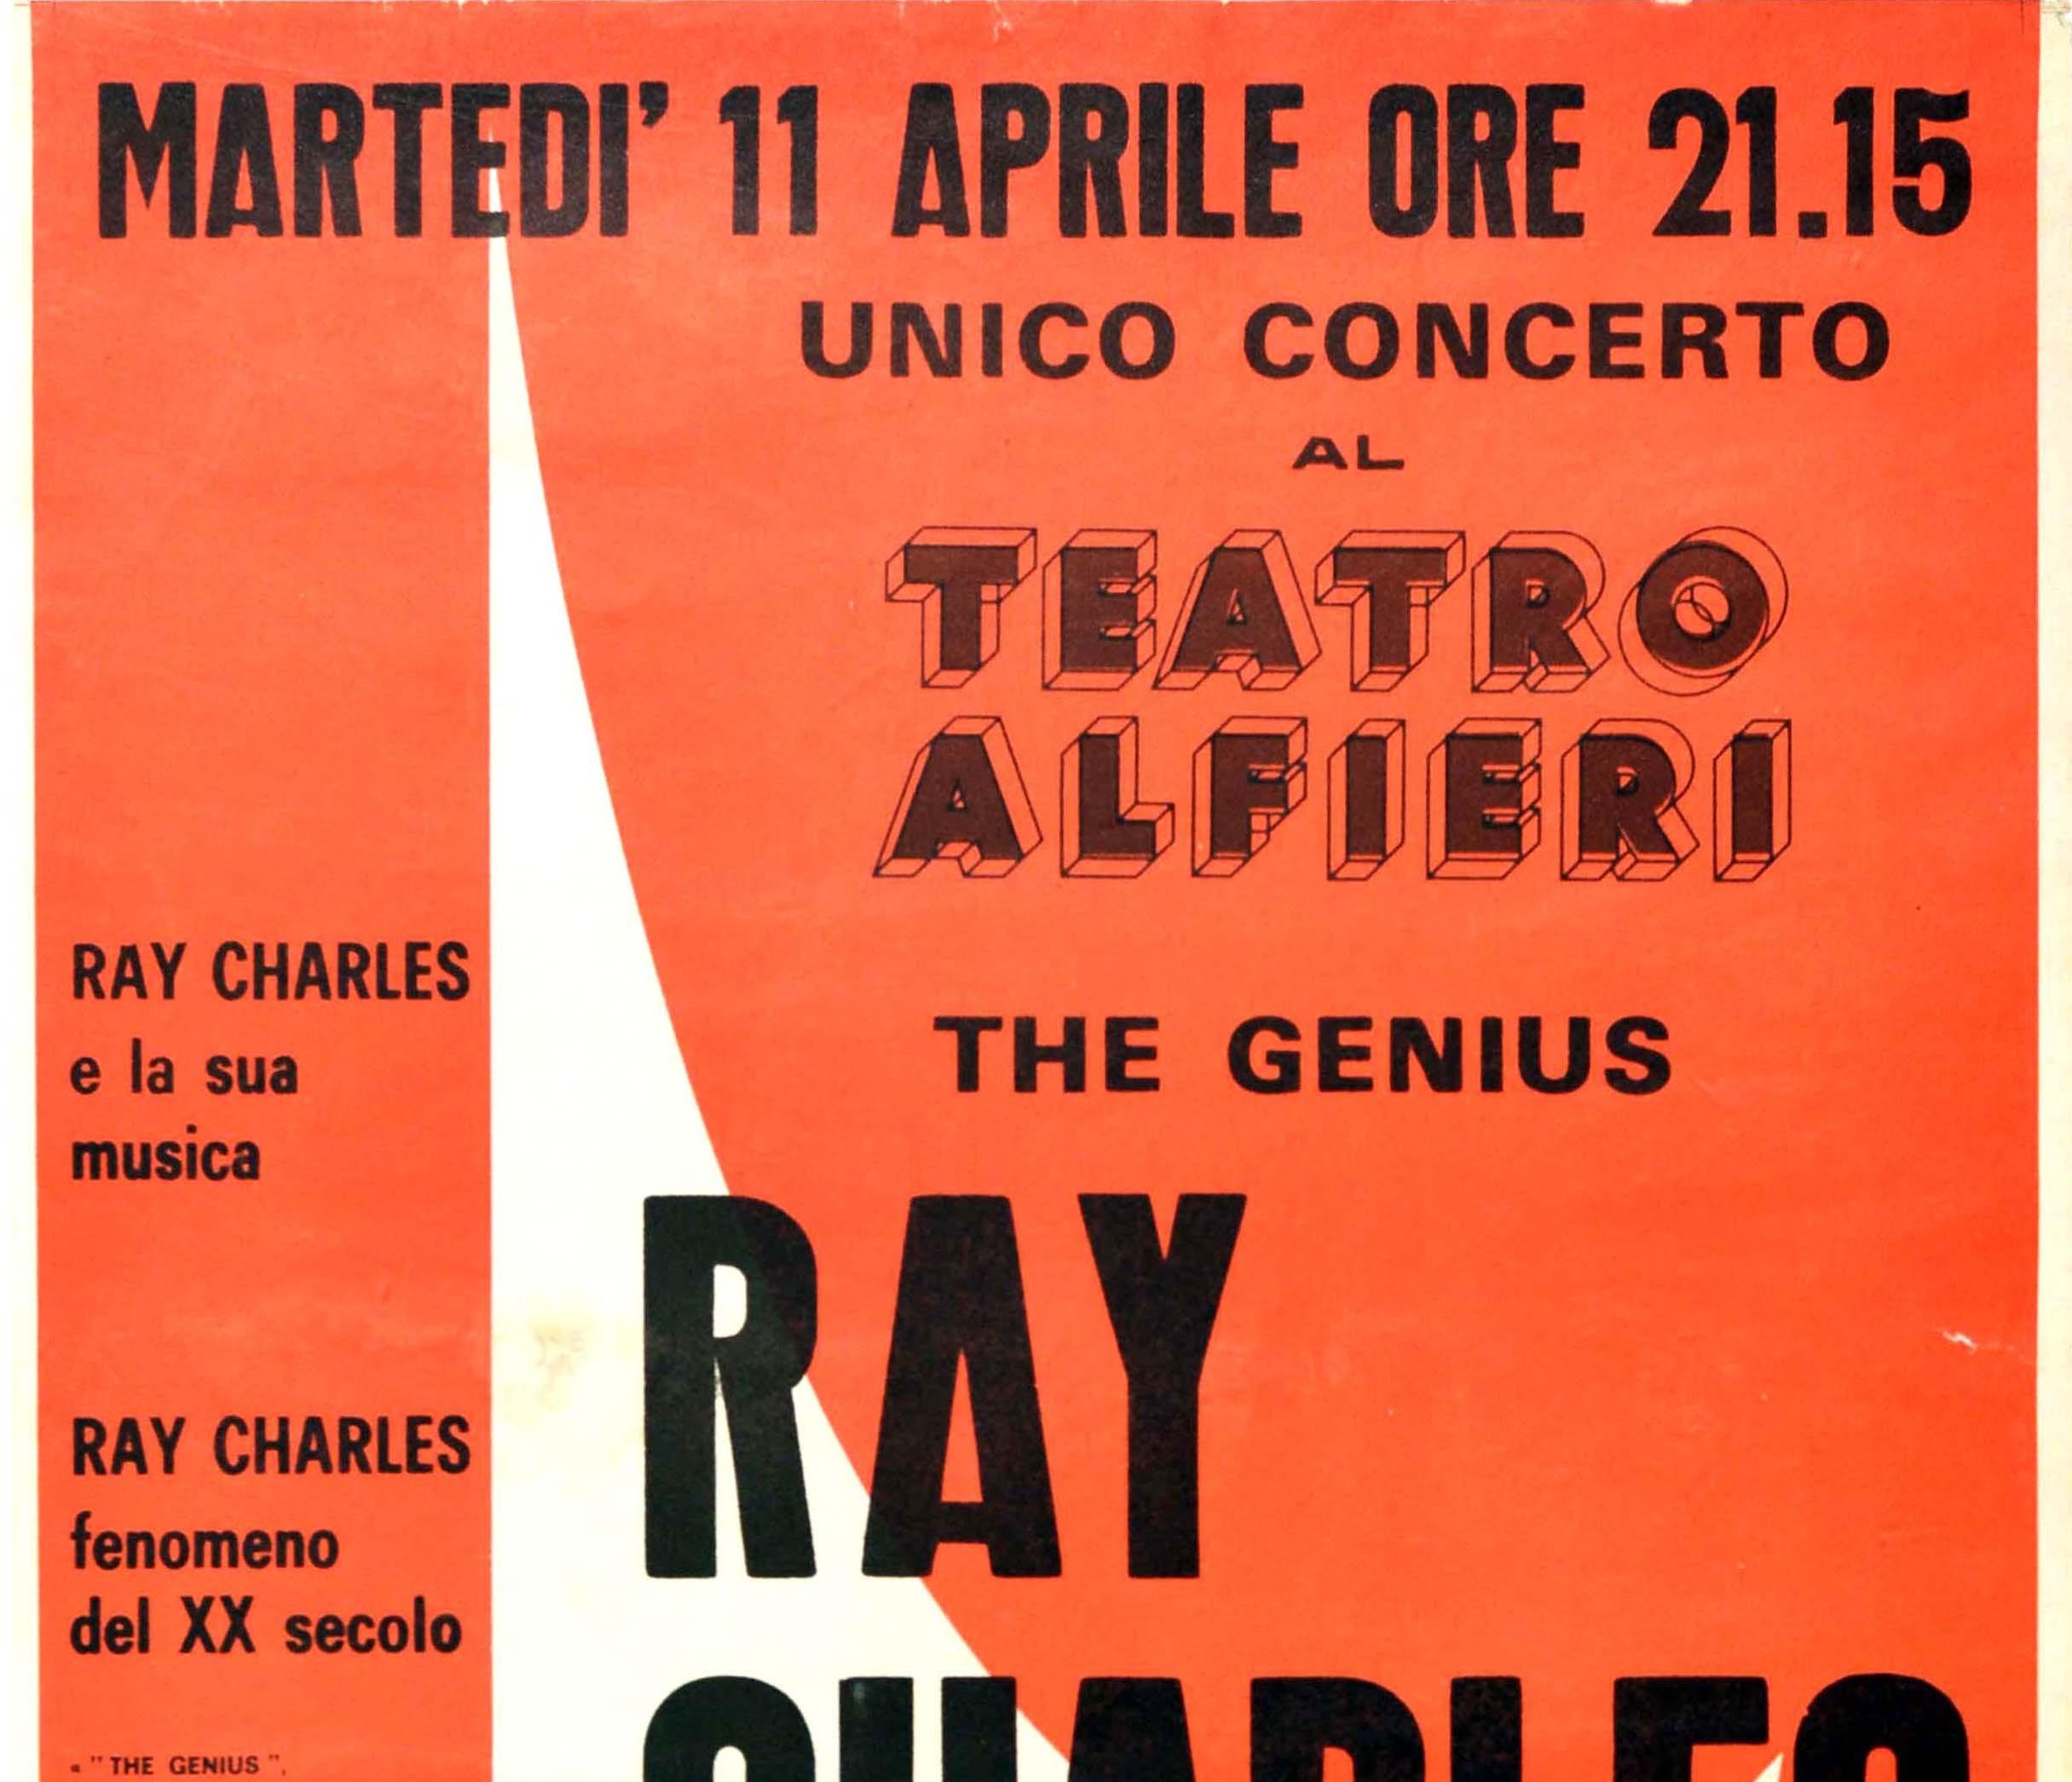 Original Vintage Music Poster The Genius Ray Charles Single Concert Turin Italy - Print by Unknown